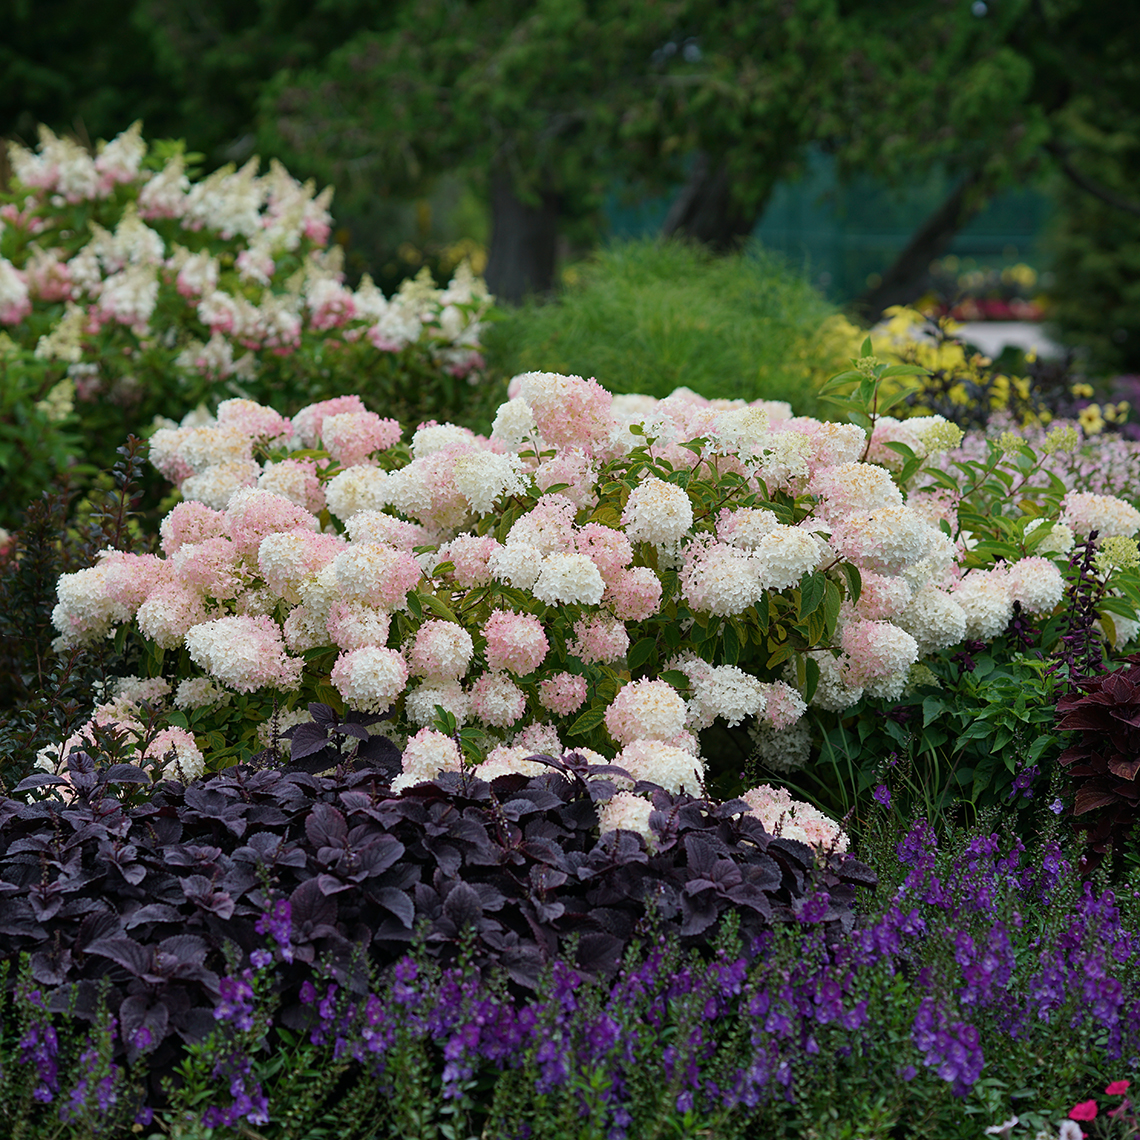 Little Lamb hydrangea taking on pink coloration in the landscape